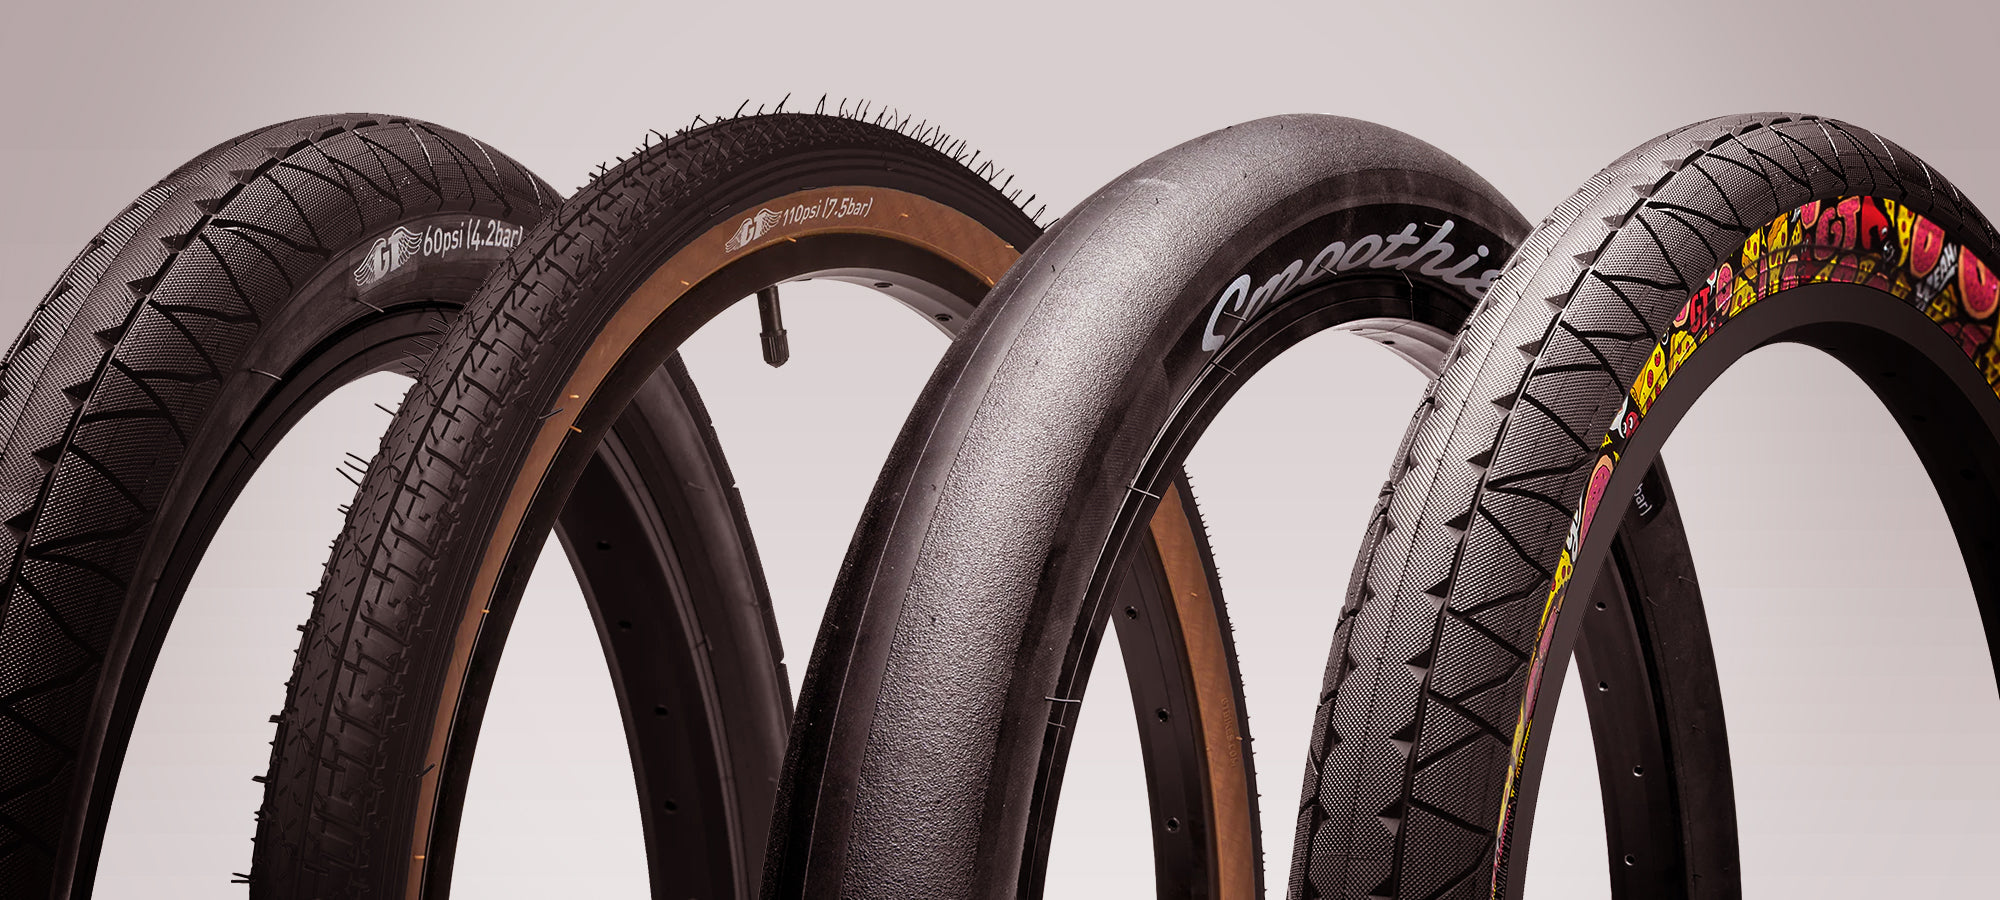 Tips for Choosing the Right BMX Tires